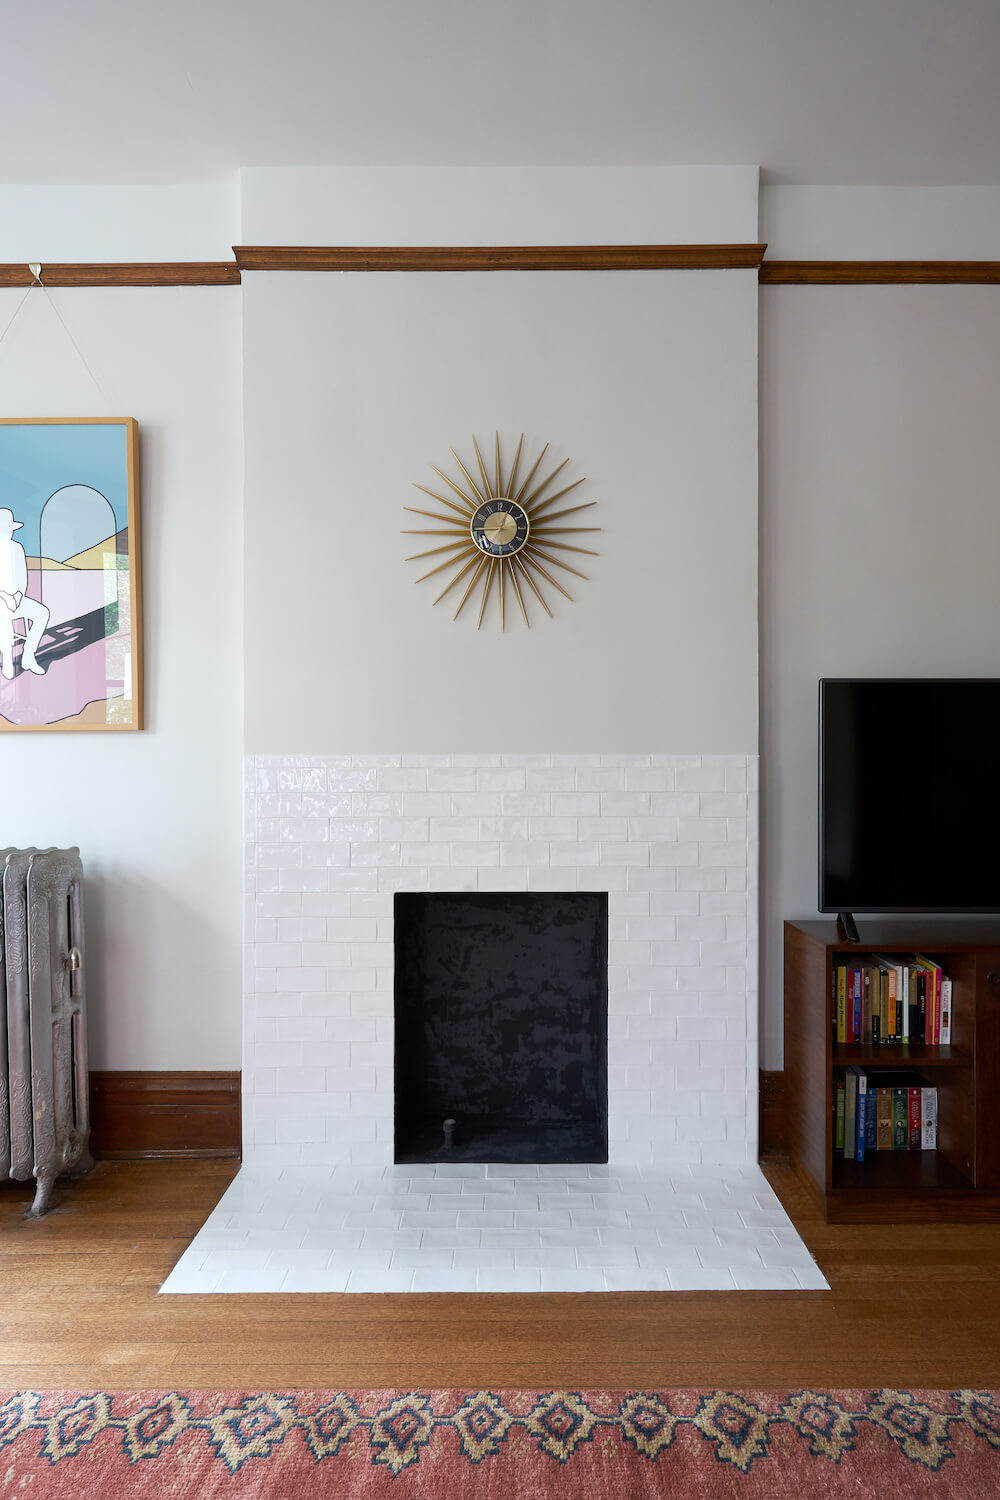 White tiled fireplace with decorative clock above